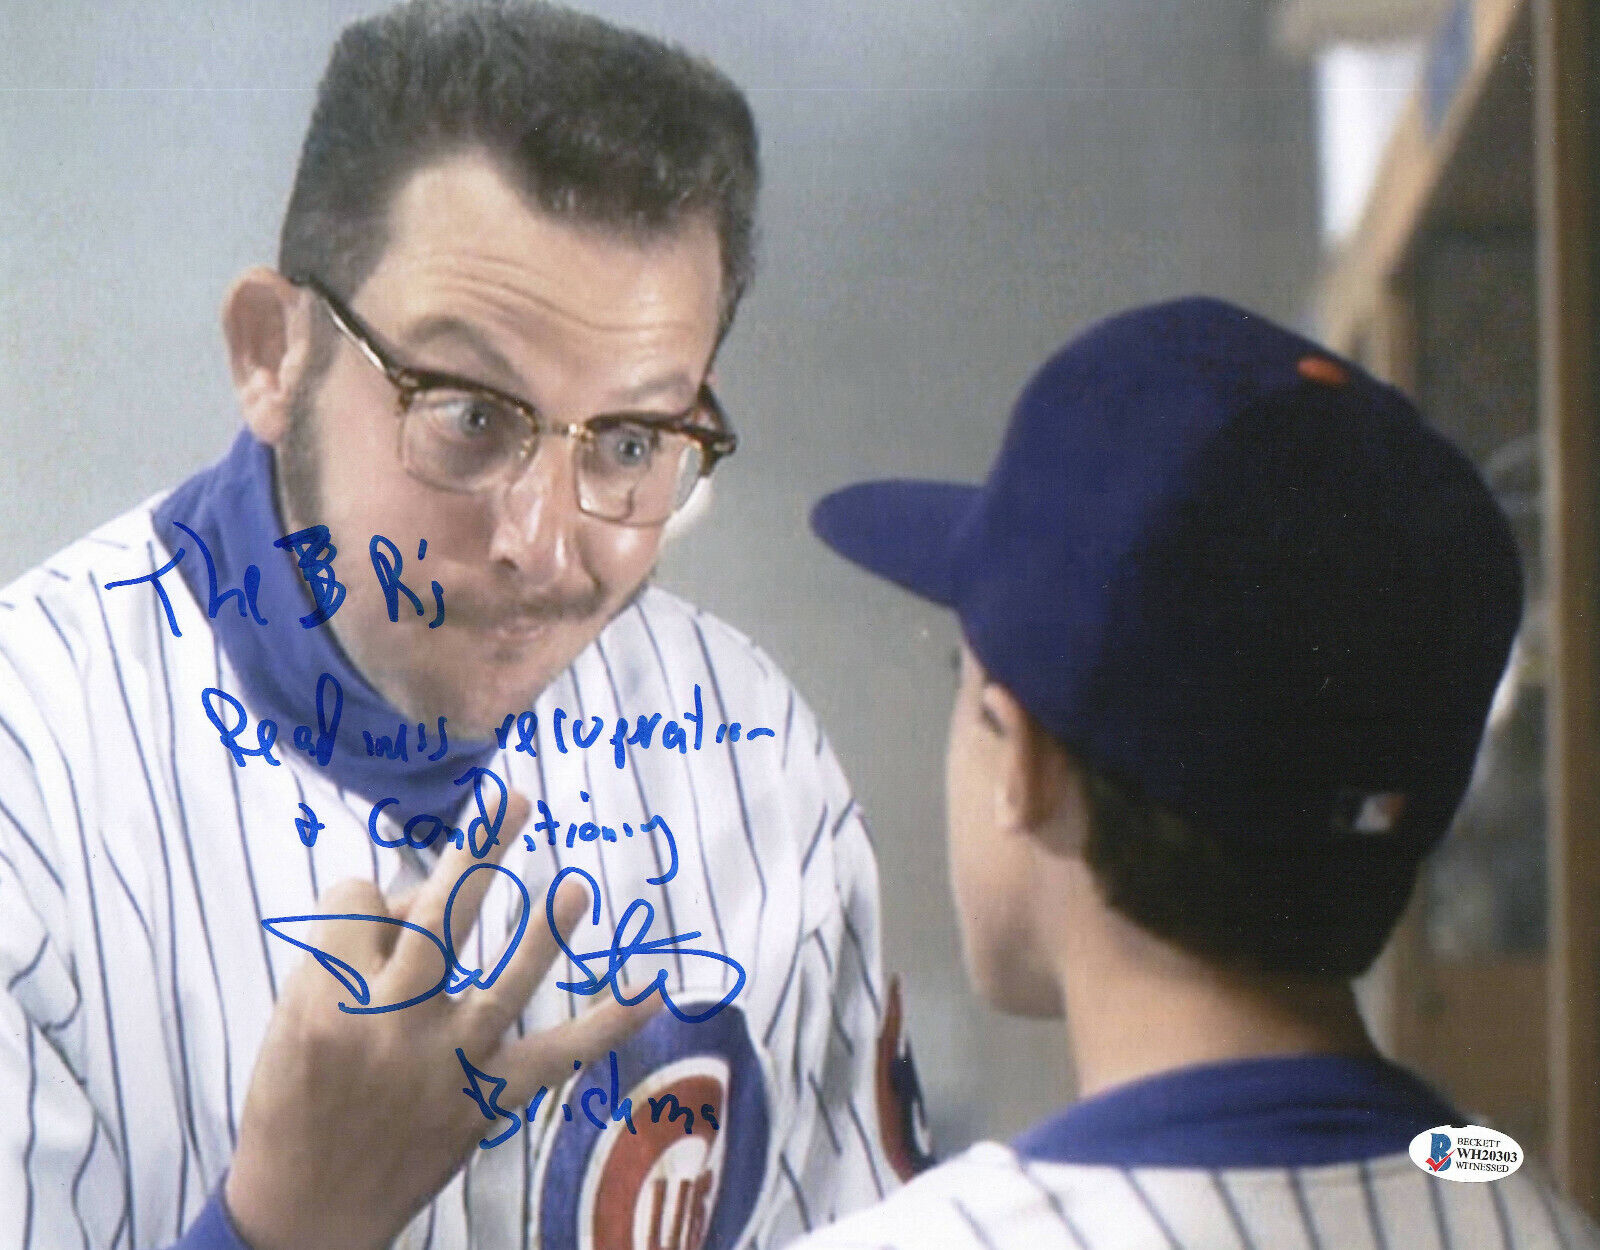 DANIEL STERN SIGNED AUTOGRAPH ROOKIE OF THE YEAR 11X14 PHOTO BECKETT 23